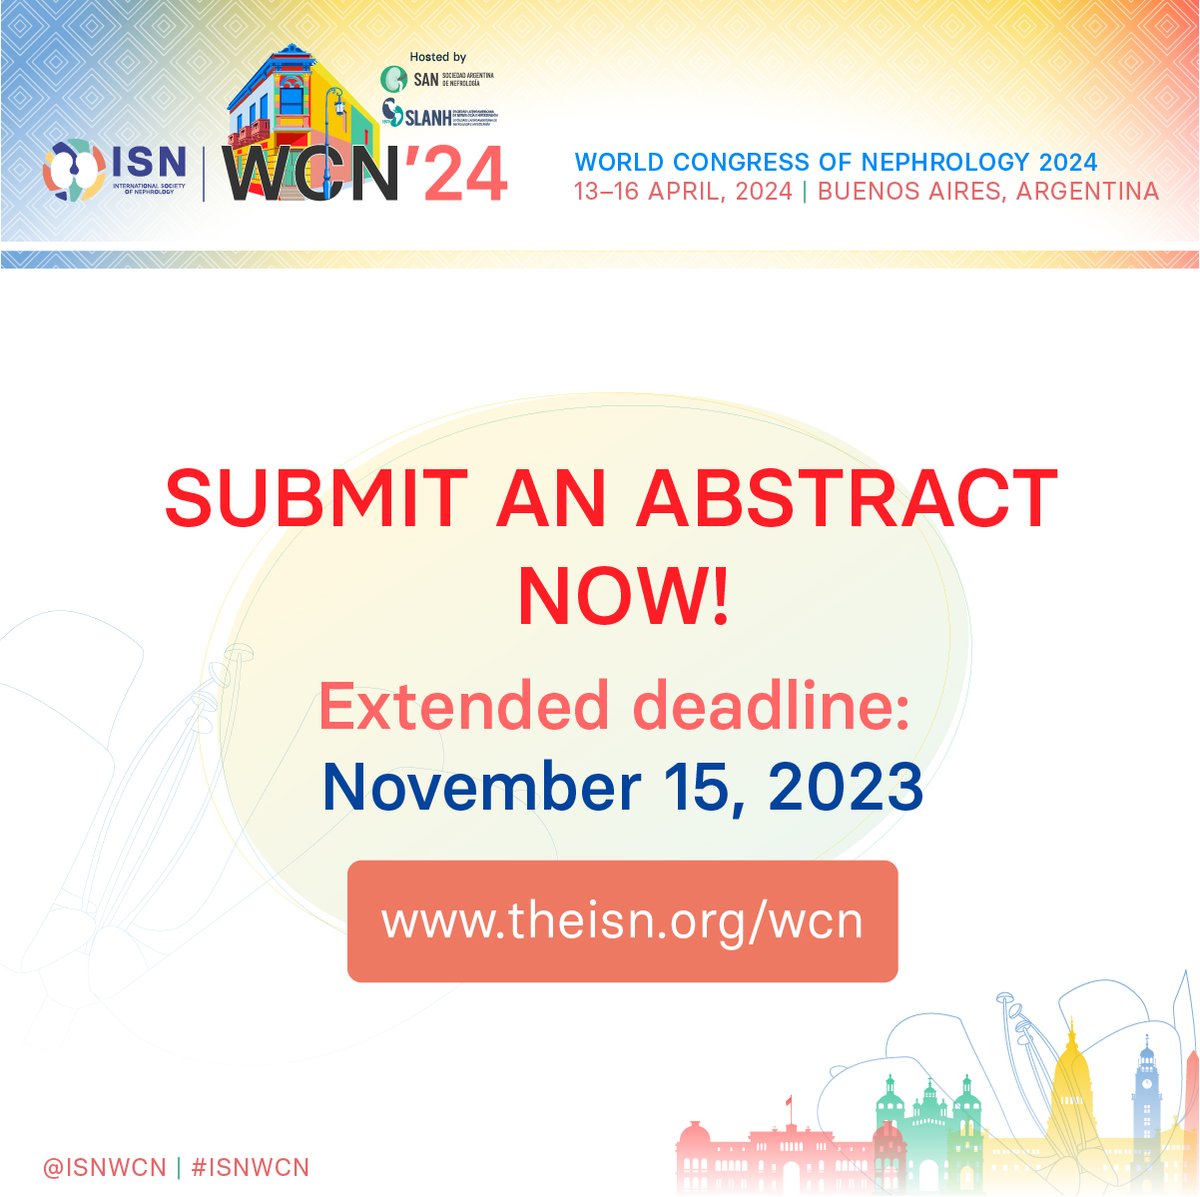 Exciting Updates for WCN'24: New abstract deadline & Scientific Program now online! 💥 New deadline for abstract submission: November 15 at midnight CET ow.ly/U6l850Q2E2E 💥 Scientific Program now available: WCN’24 brings you a four-day program packed with scientific and